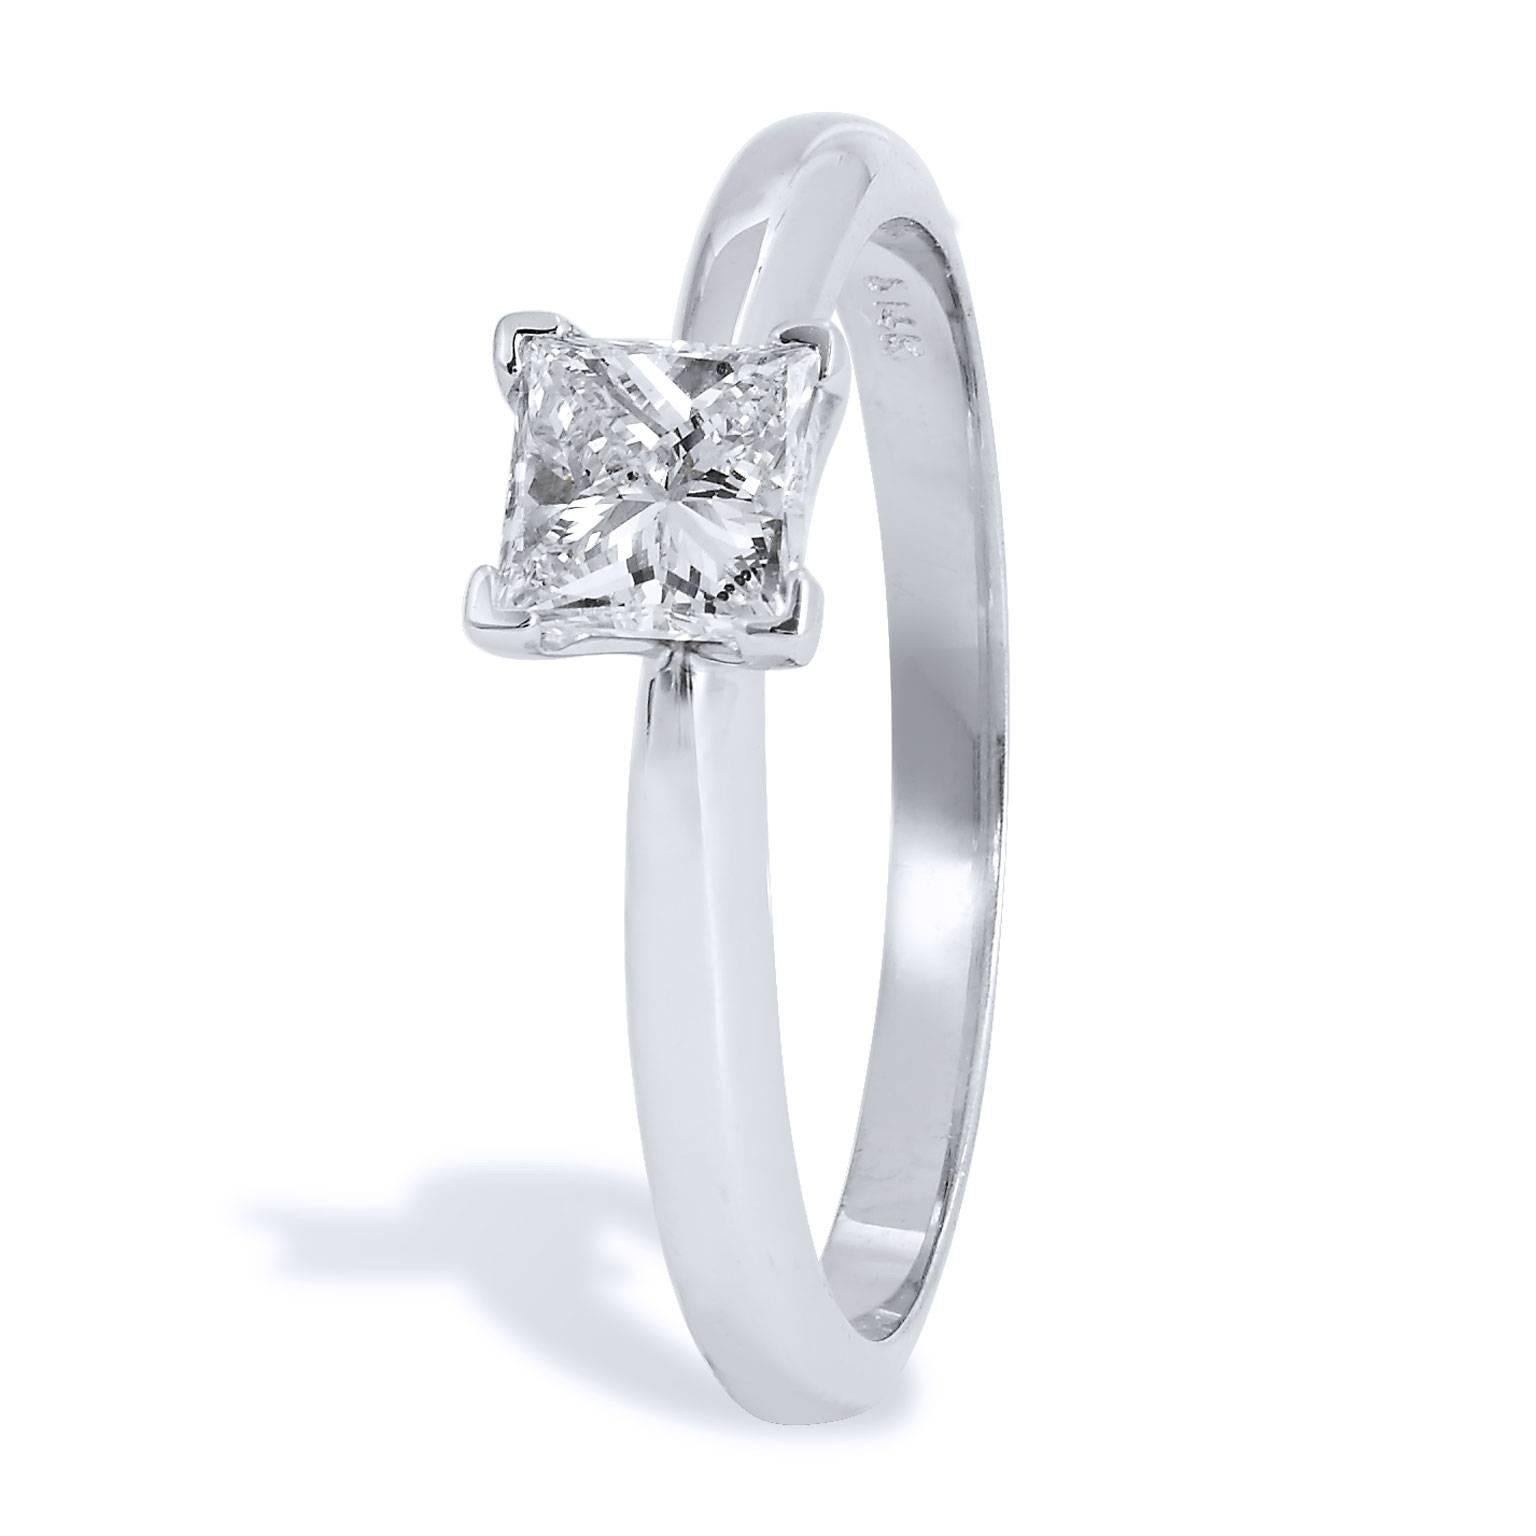 An engagement ring that will make her heart swoon. A 0.60 carat princess cut diamond solitaire (K/SI2) set on a 14 karat white gold reverse tapered shank exudes fun and self-assurance. The modern square shape of the princess cut diamond presents